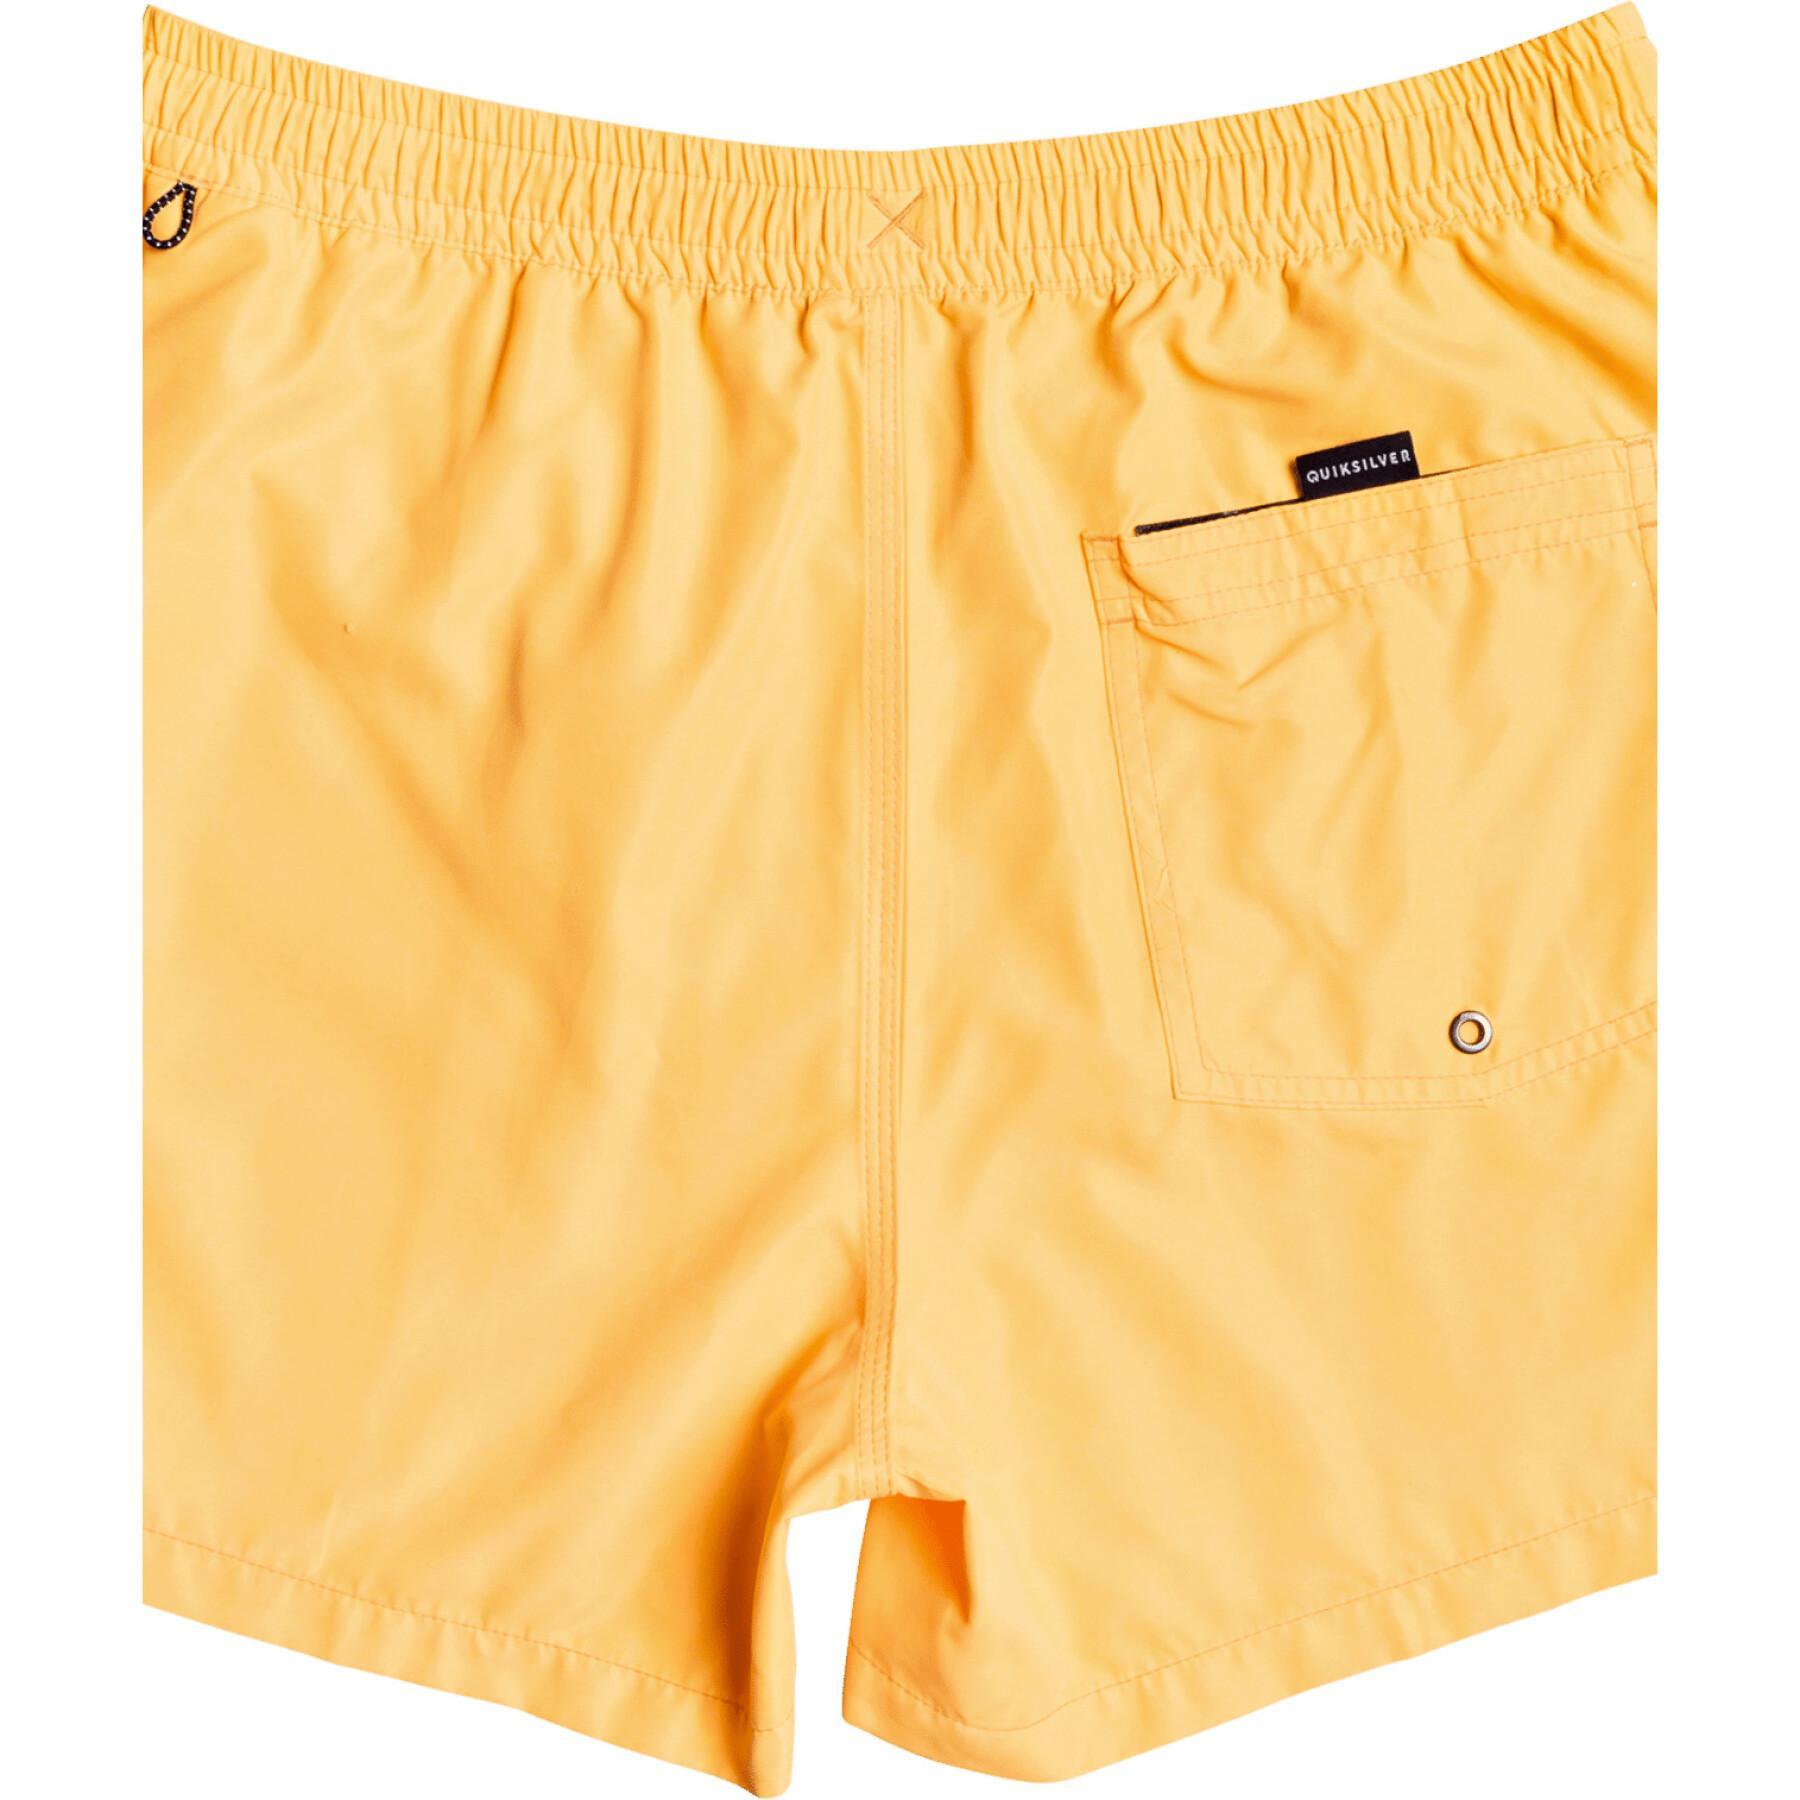 Swim shorts Quiksilver Everyday Volley 15